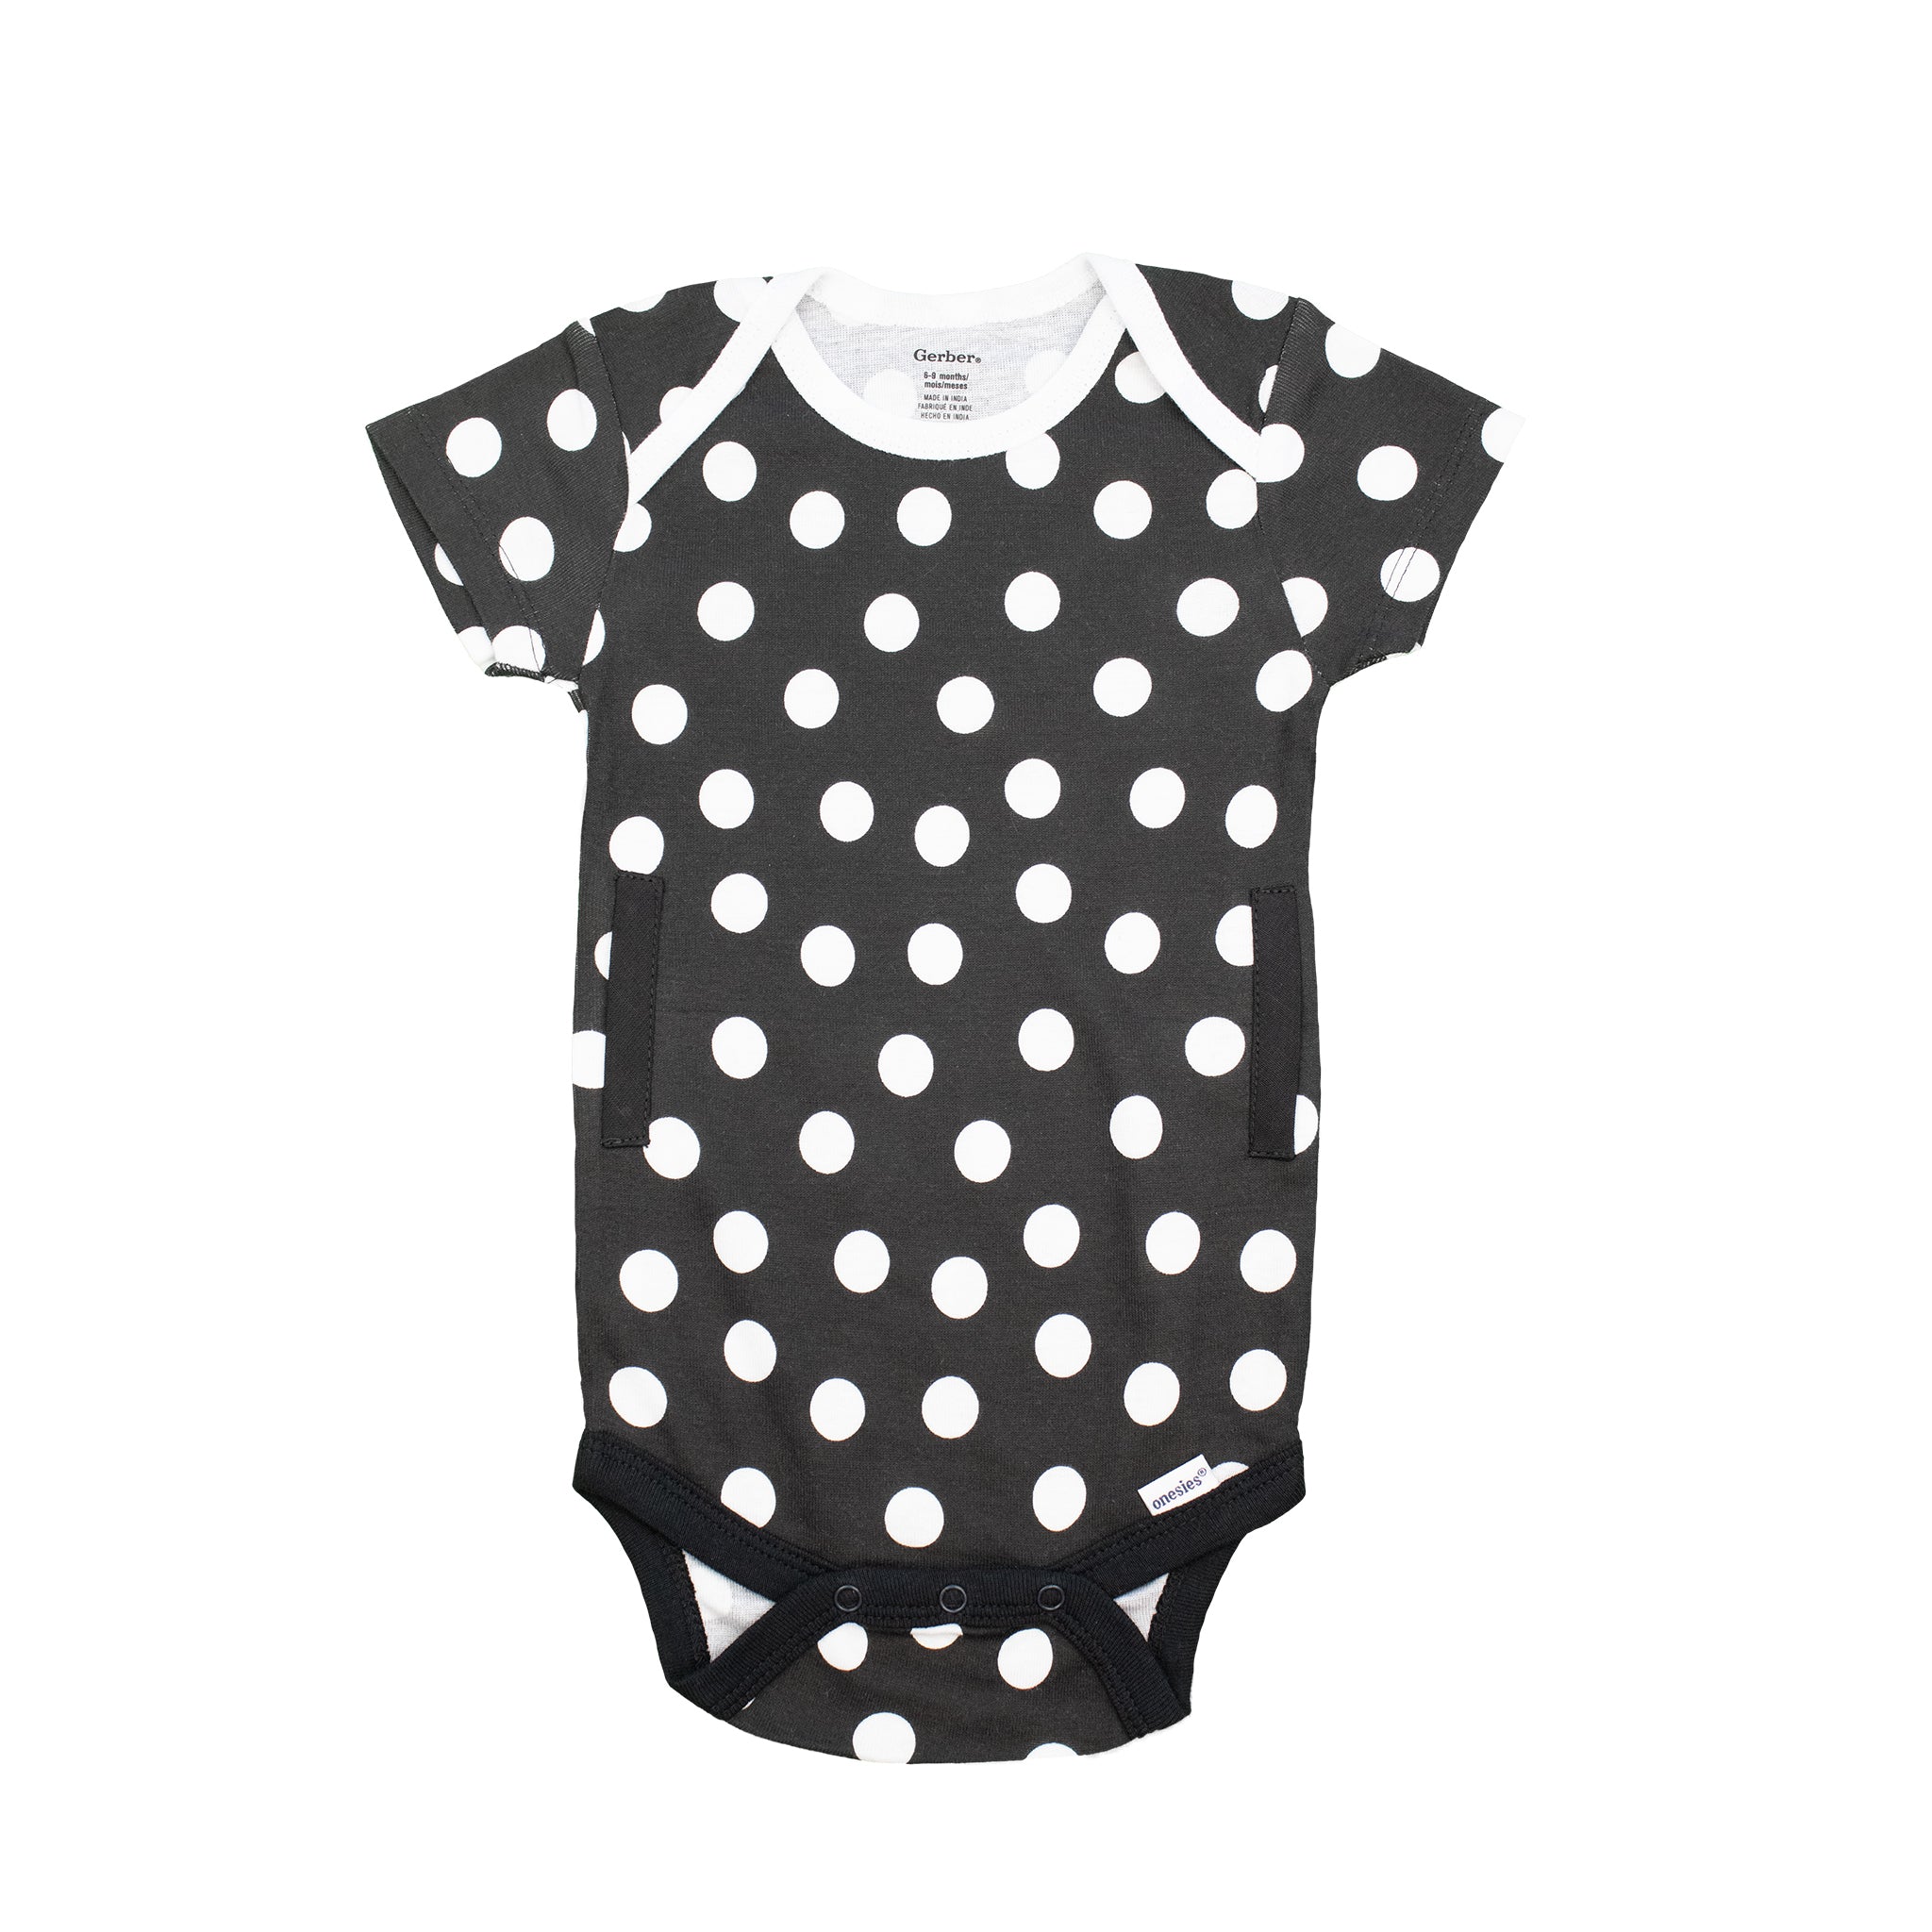 Black and White Polka Dots Short Sleeve Onesie FINAL CLEARANCE